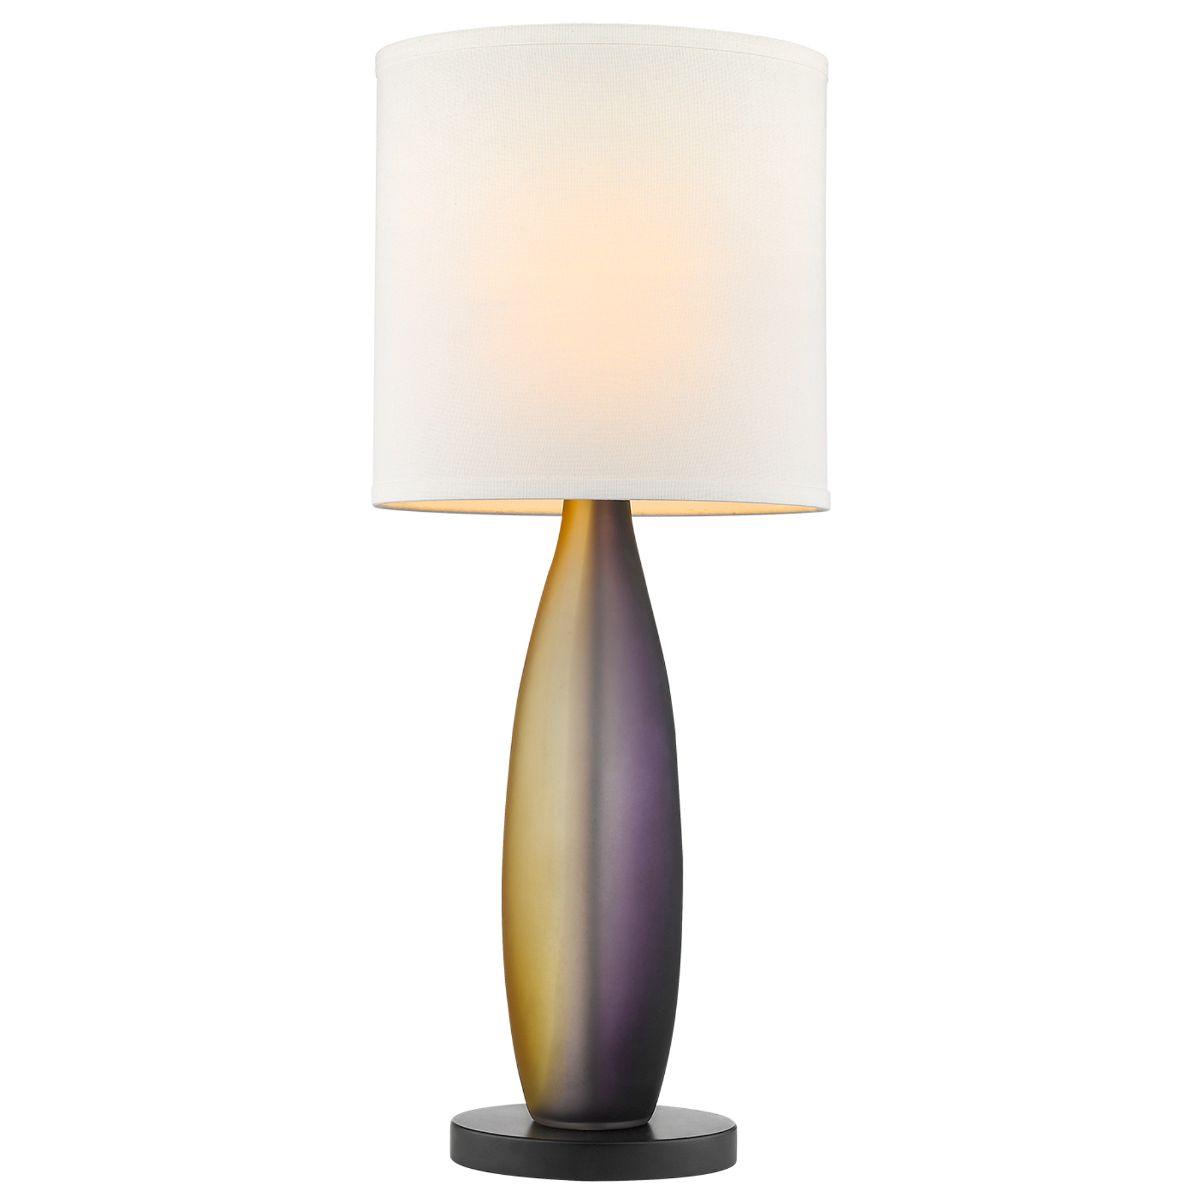 Elixer 1 Light Table Lamp Plum Gold Frosted Glass with Ebony Lacquer Finish